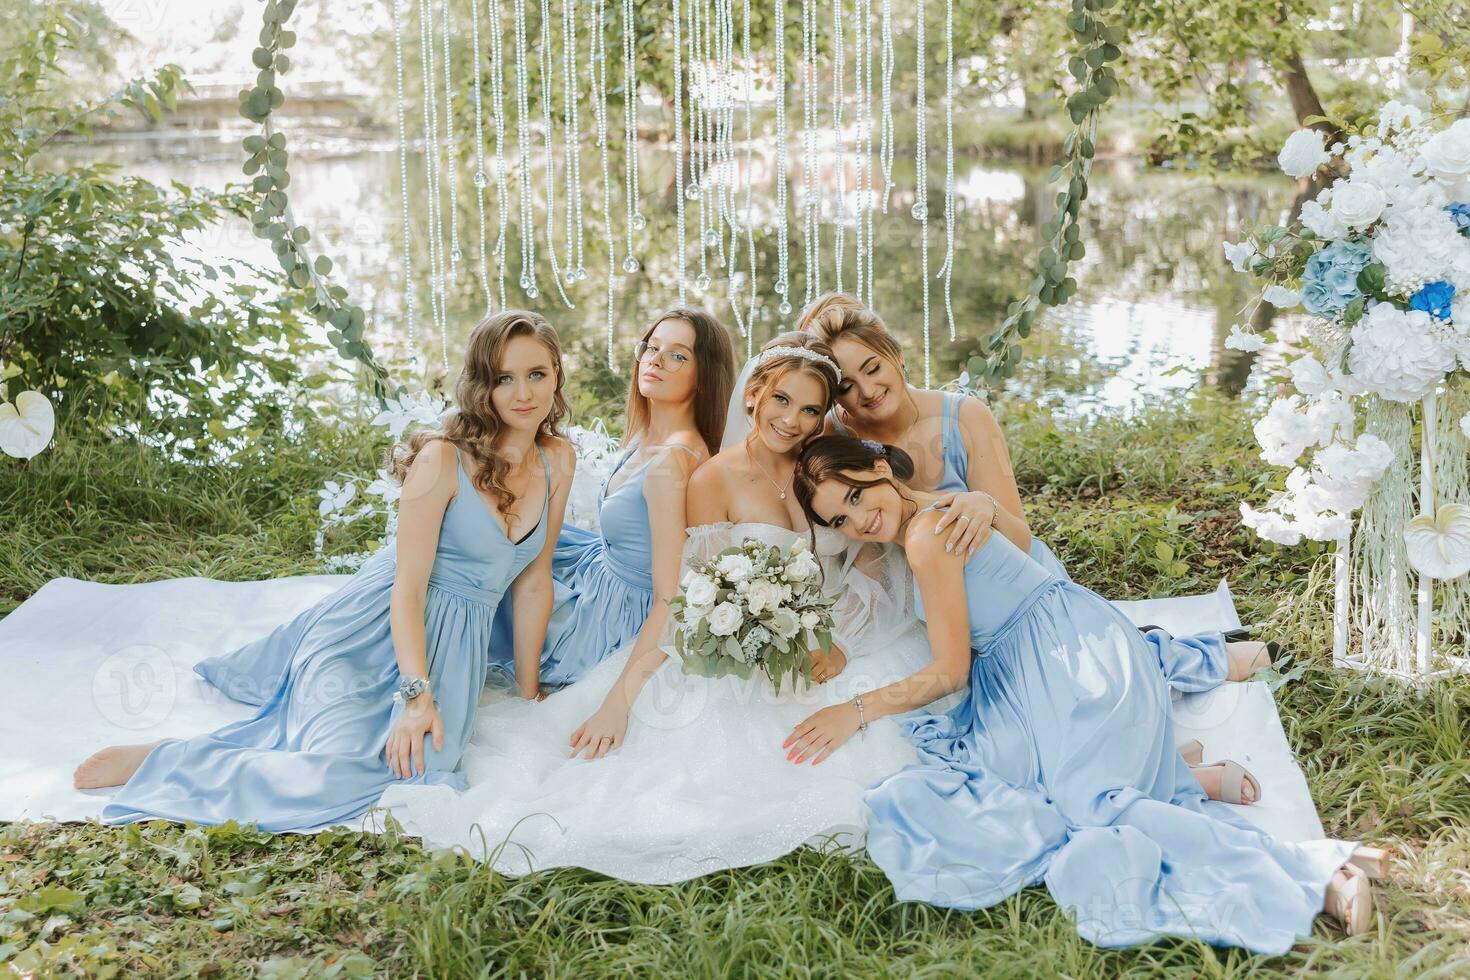 The bridesmaids are in blue dresses, the bride is holding a beautiful bouquet. Sitting enjoying the celebration. Beautiful luxury wedding blog concept. Spring wedding. photo